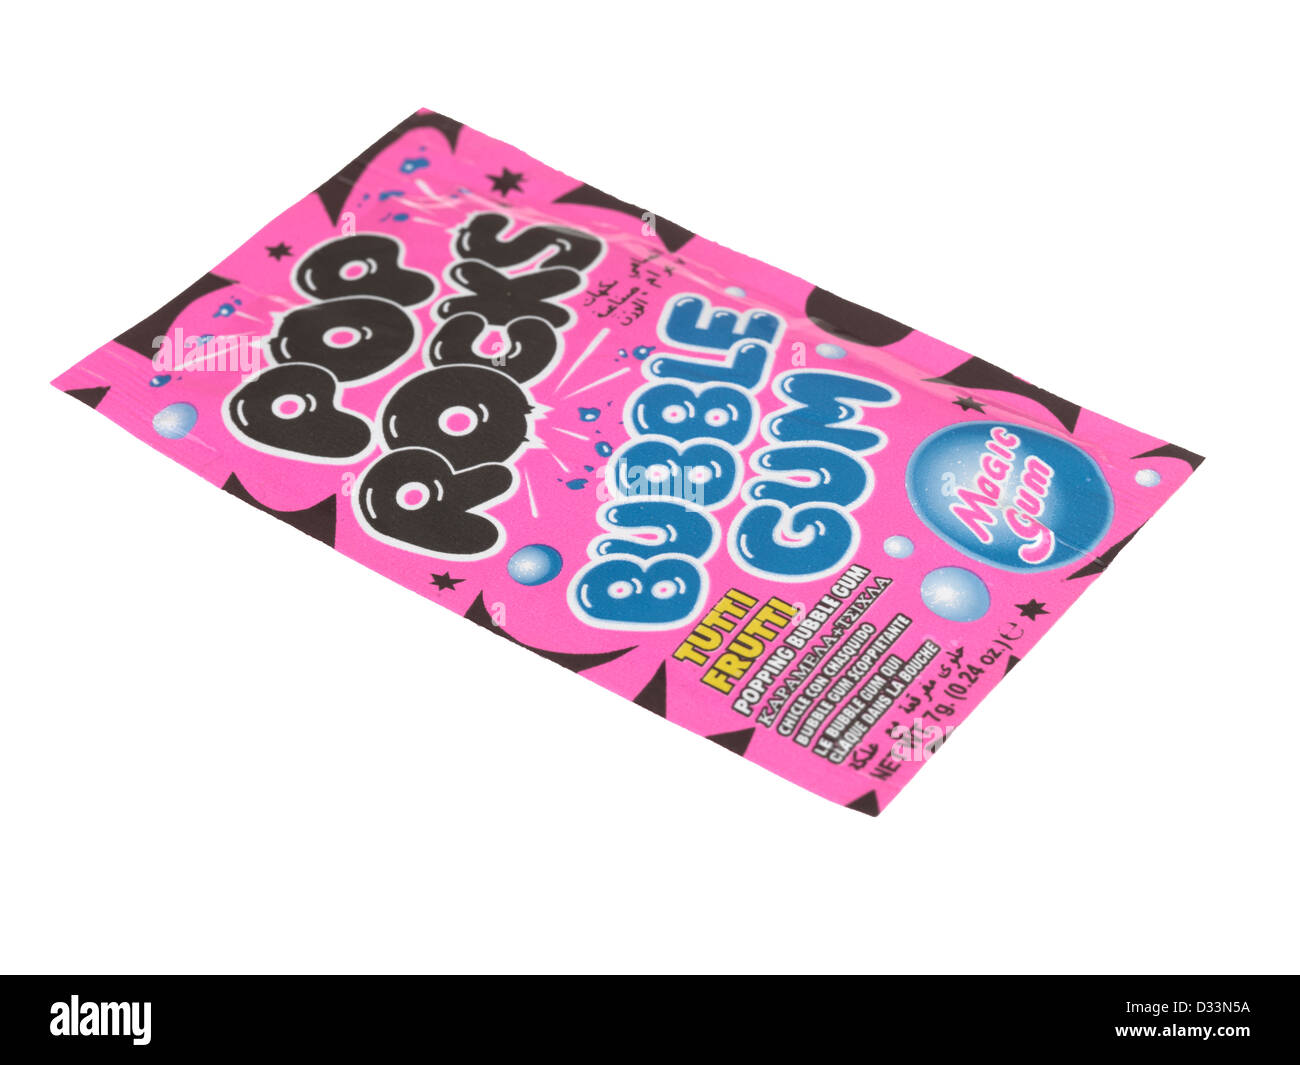 Pack Of Pop Rocks Branded And Packaged Bubble Gum Isolated Against A White Background With No People And A Clipping Path Stock Photo